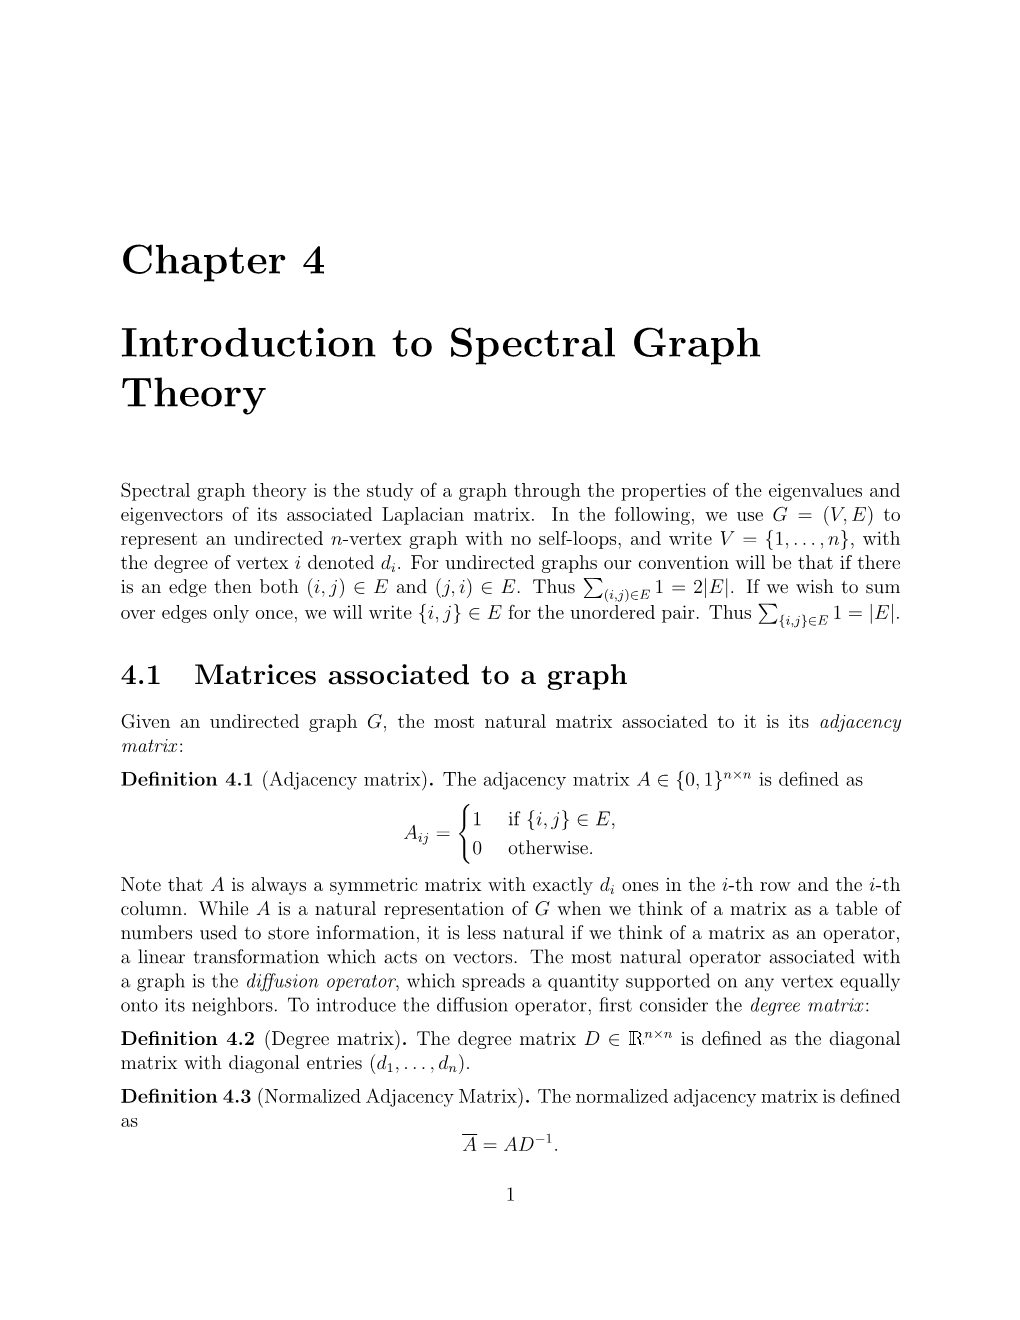 Chapter 4 Introduction to Spectral Graph Theory